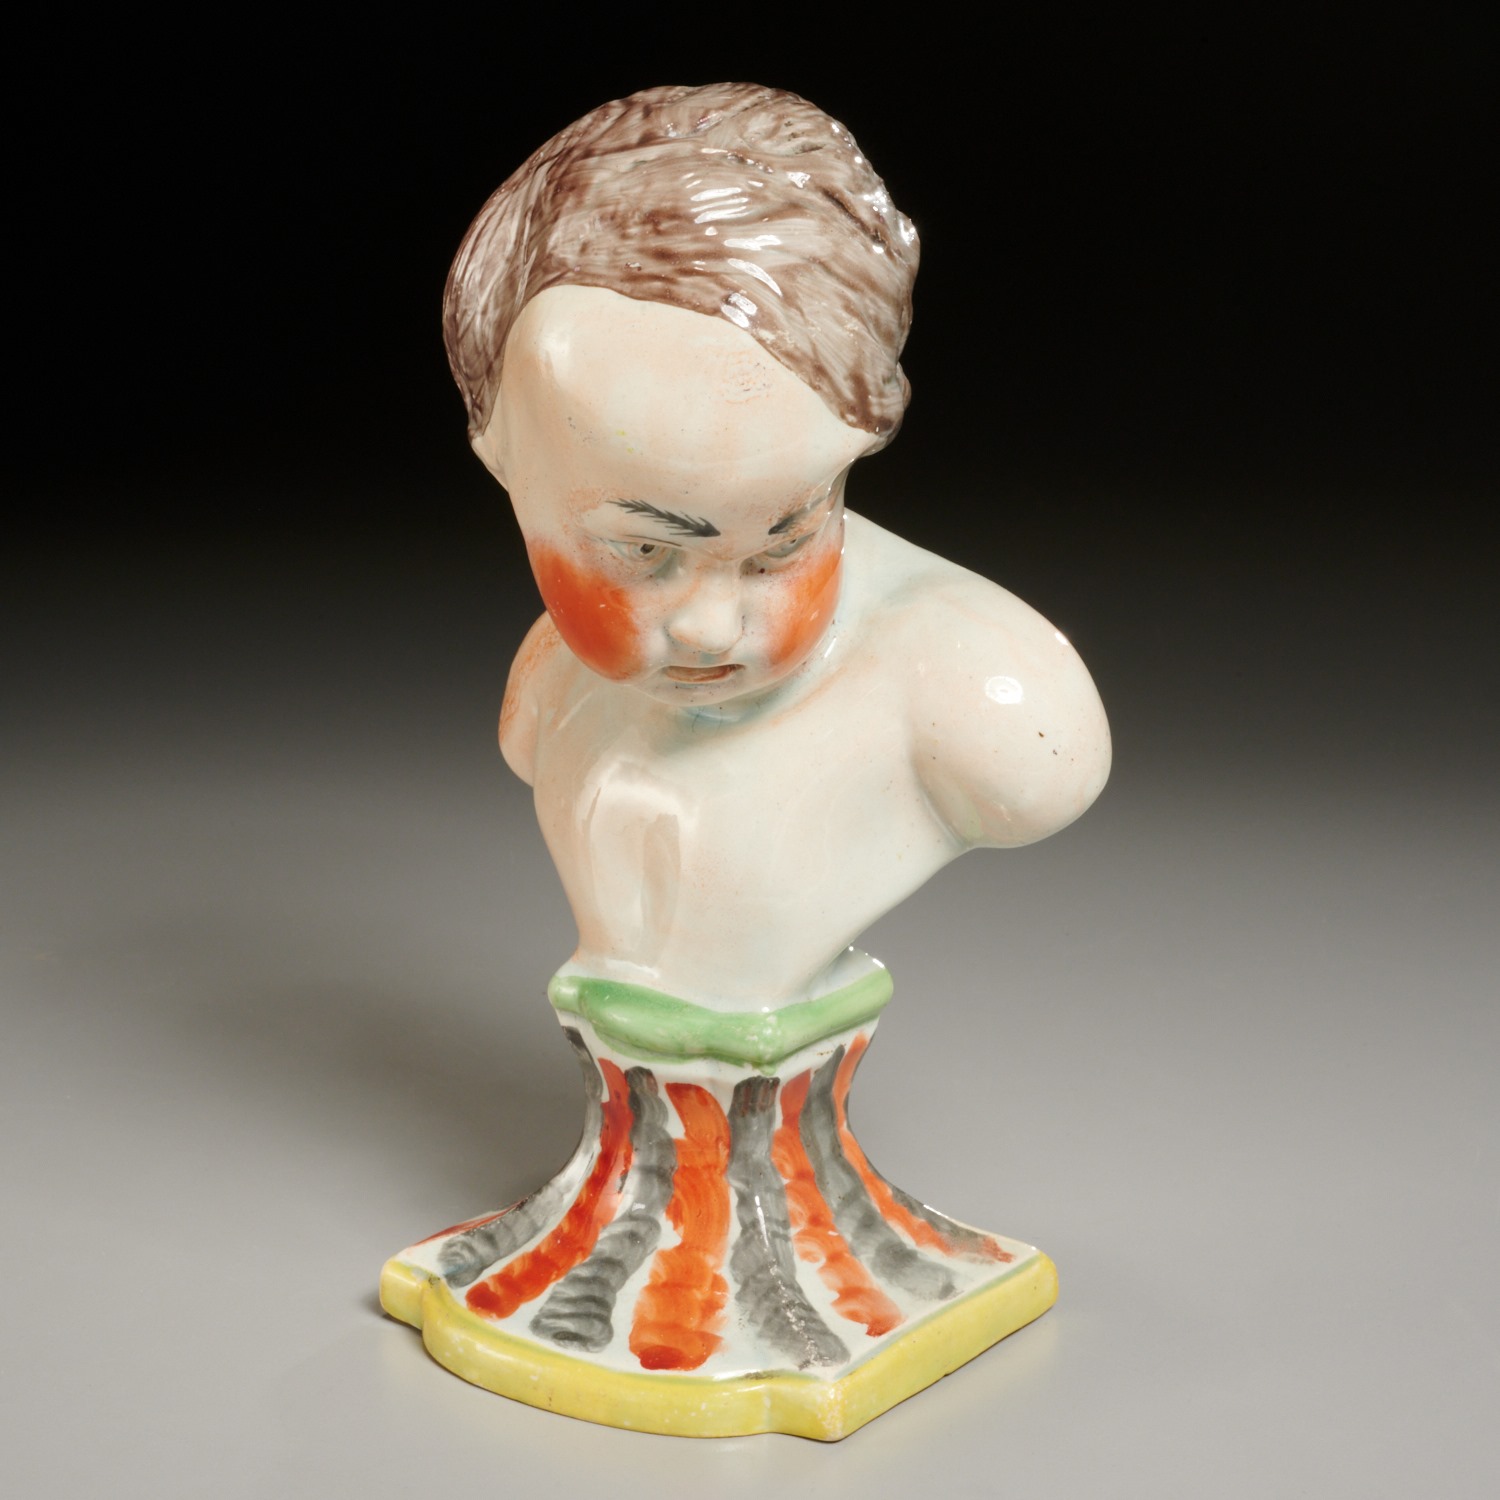 WOOD CALDWELL PEARLWARE BUST 2a5d16